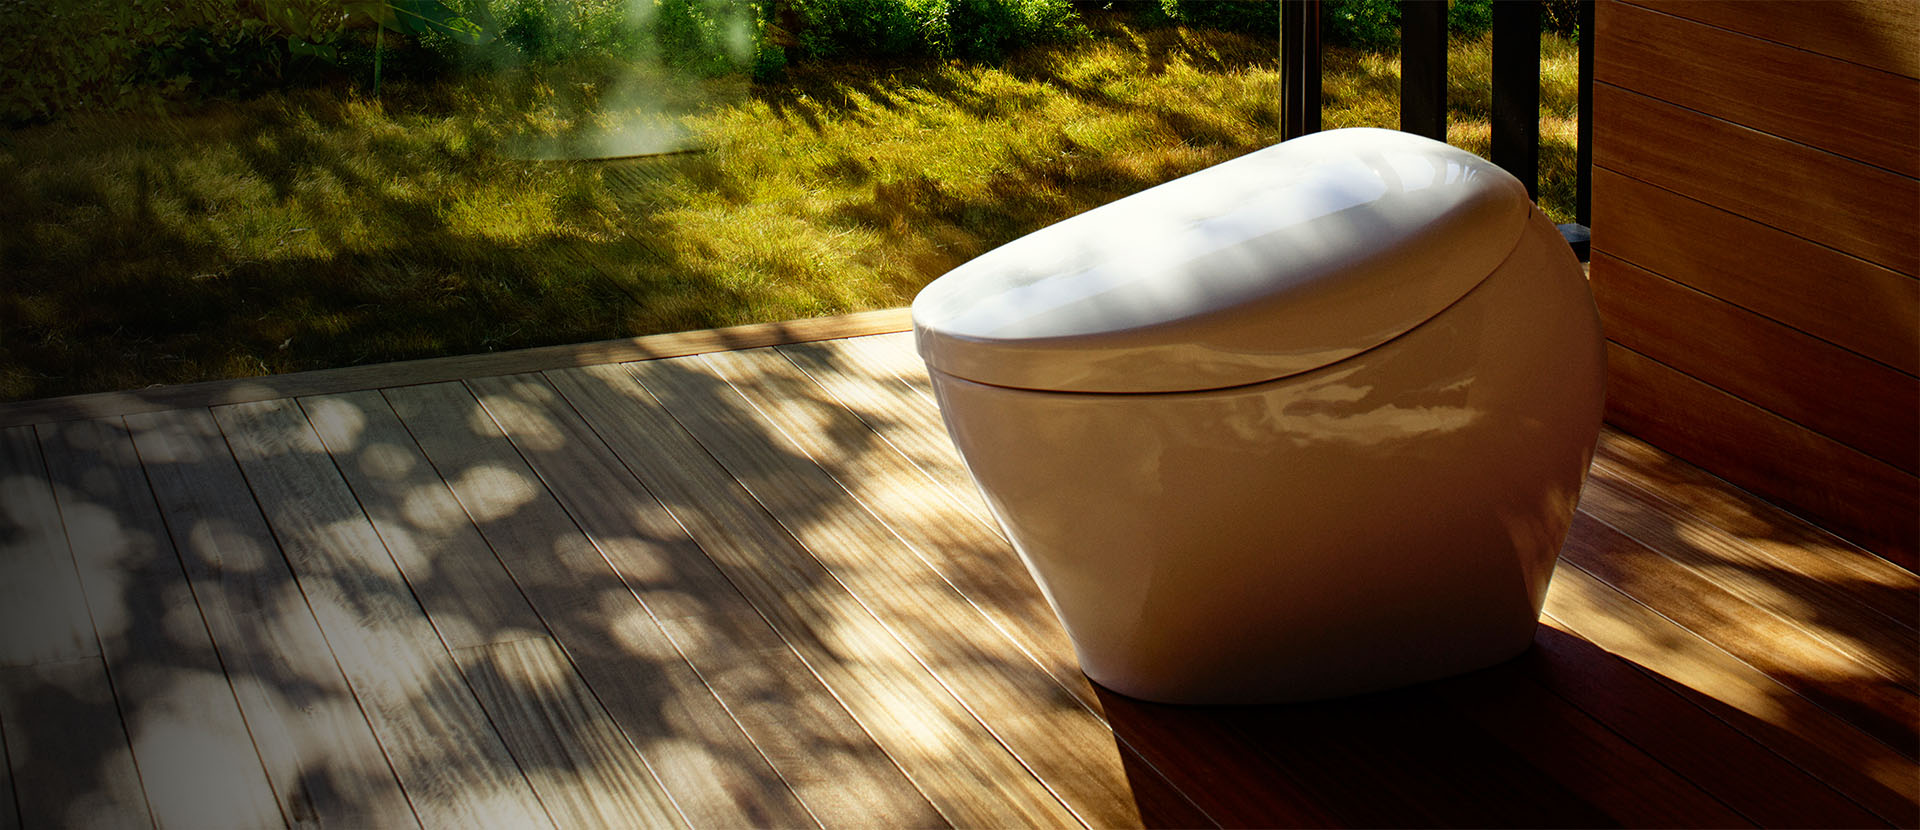 Background image of a TOTO NEOREST Toilet.